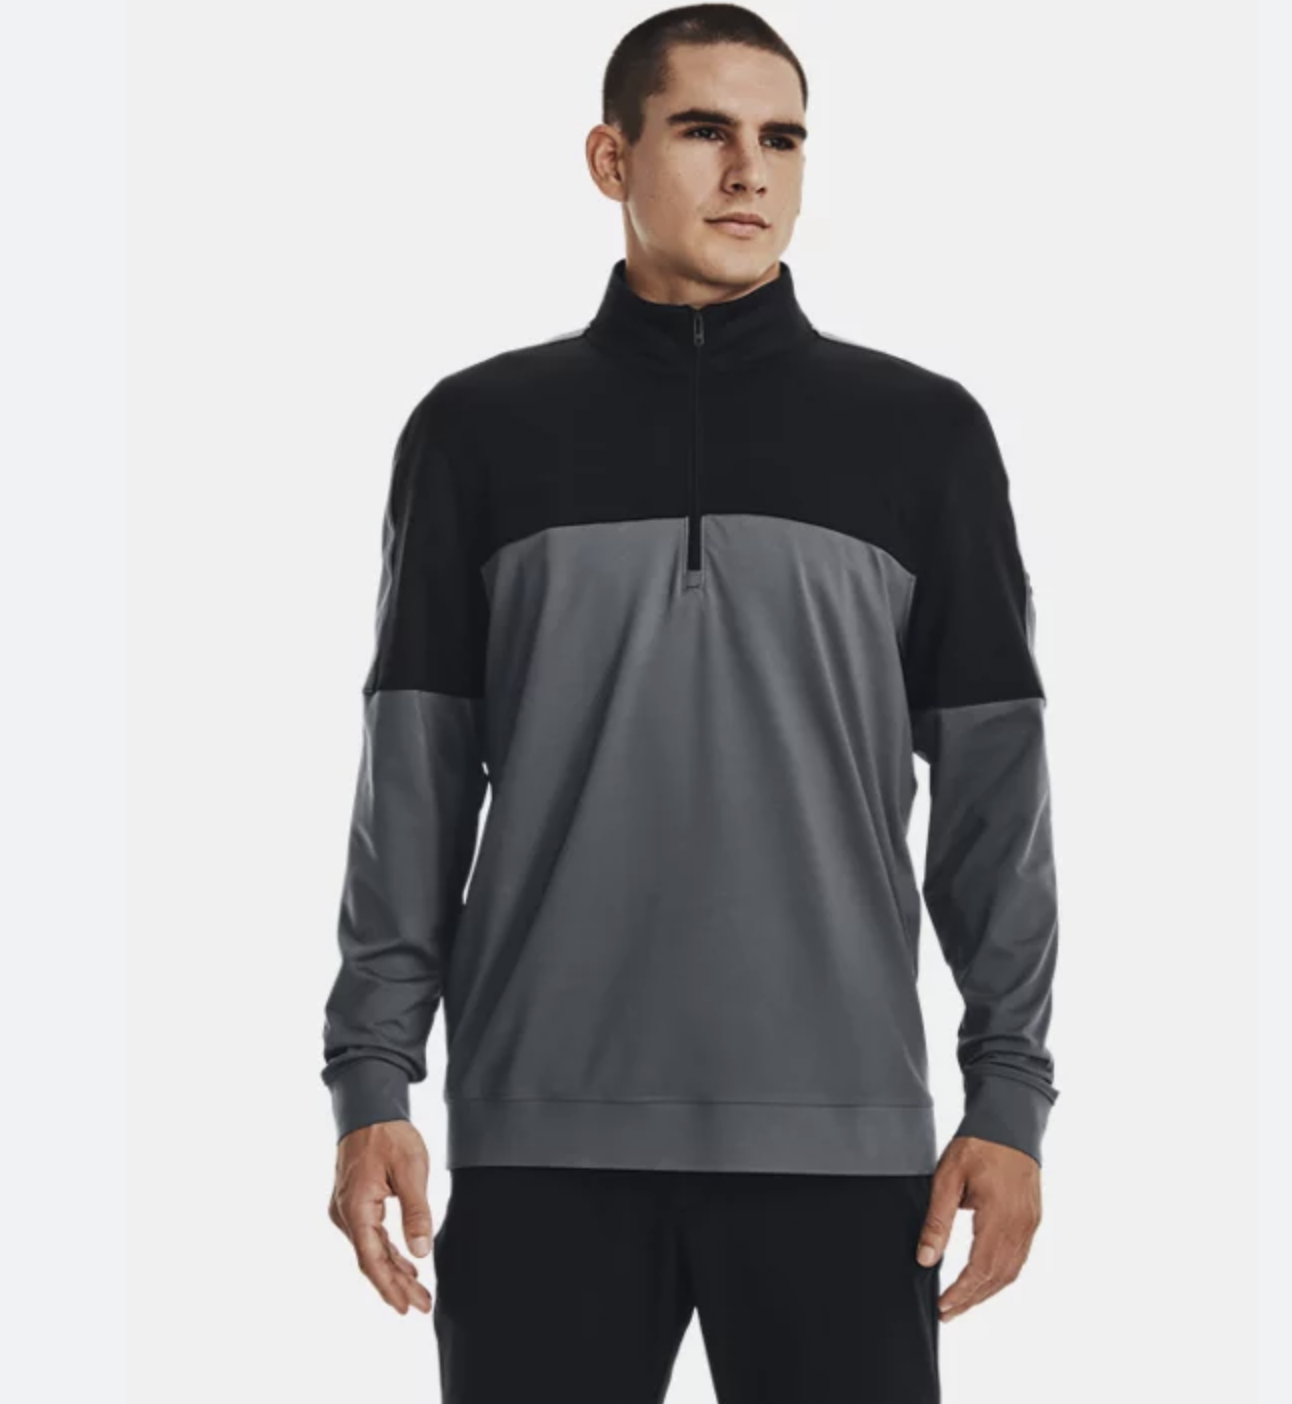 Under Armour 1377398-012 Storm Midlayer HZ Pitch Gray / Black front